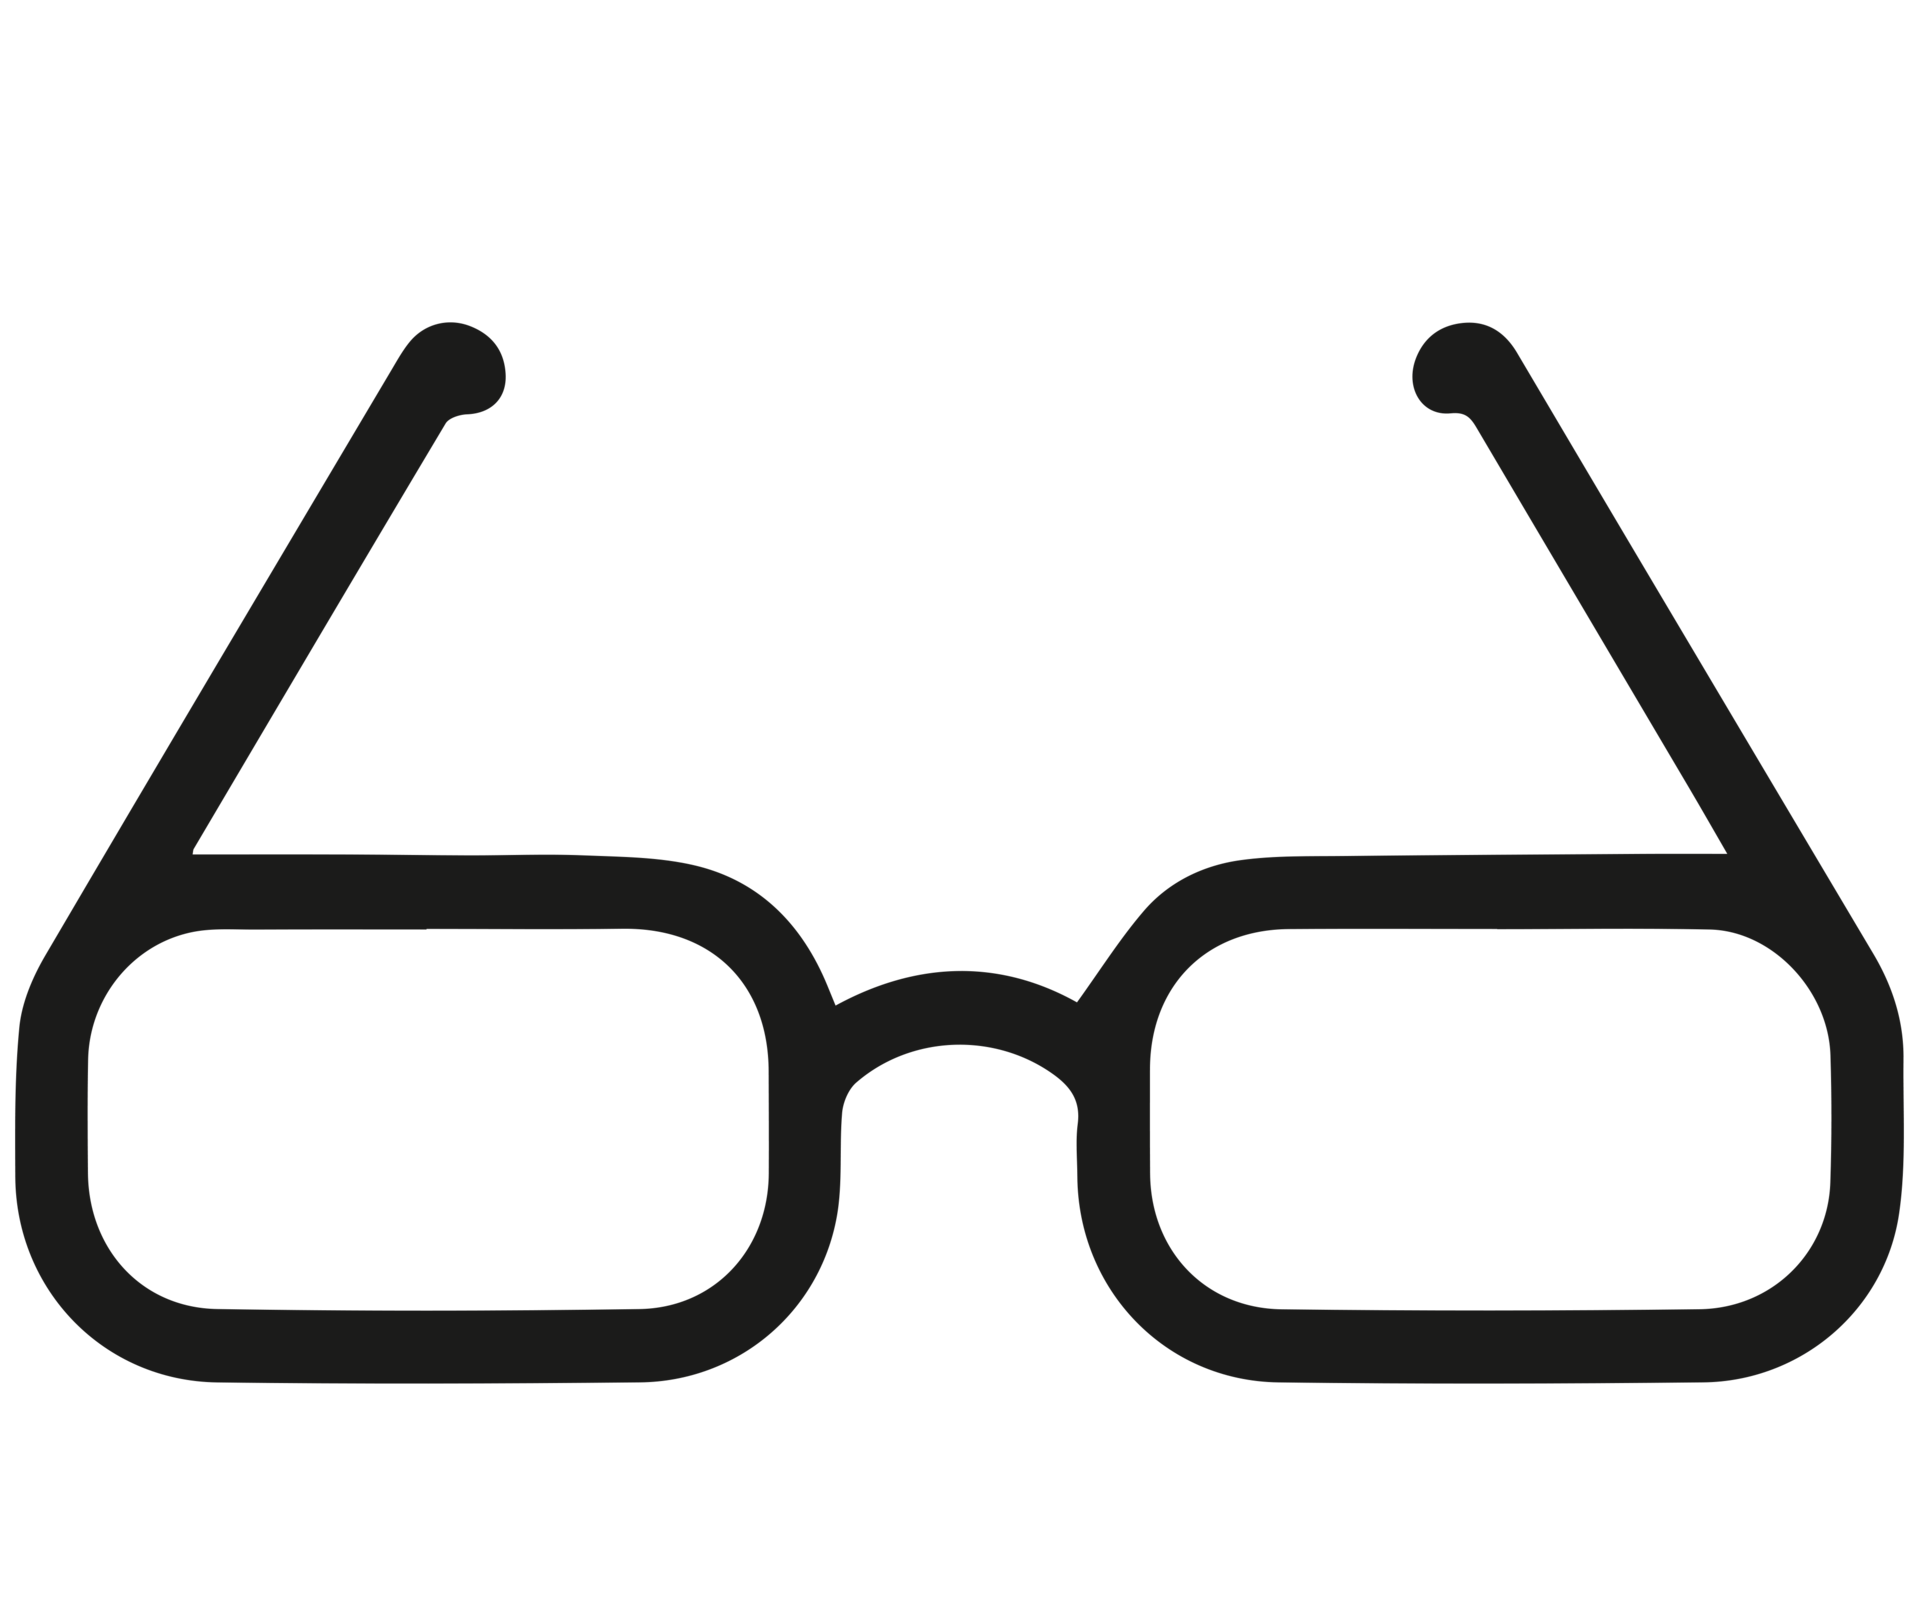 illustration of glasses icon png on Transparent Background 14455879 PNG